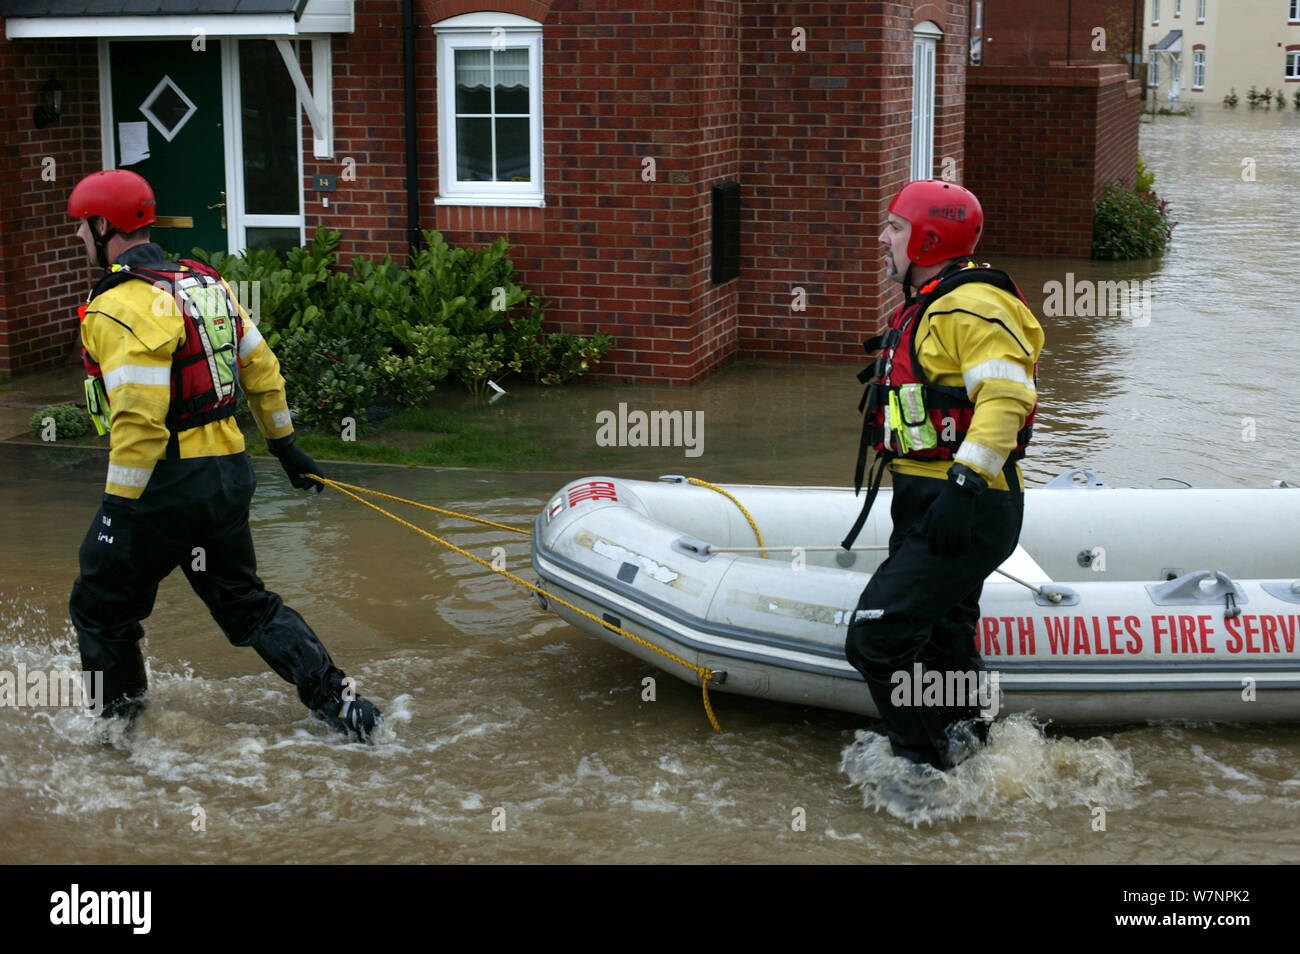 Members of north wales fire service with boat to rescue people affected by flooding of newly built housing in the Glasdir estate, Ruthin, Vale of Clwyd, Denbighshire, Wales, UK.  This is an area at risk of flooding and therefore difficult to obtain House insurance. 27/11/ 2012 Stock Photo